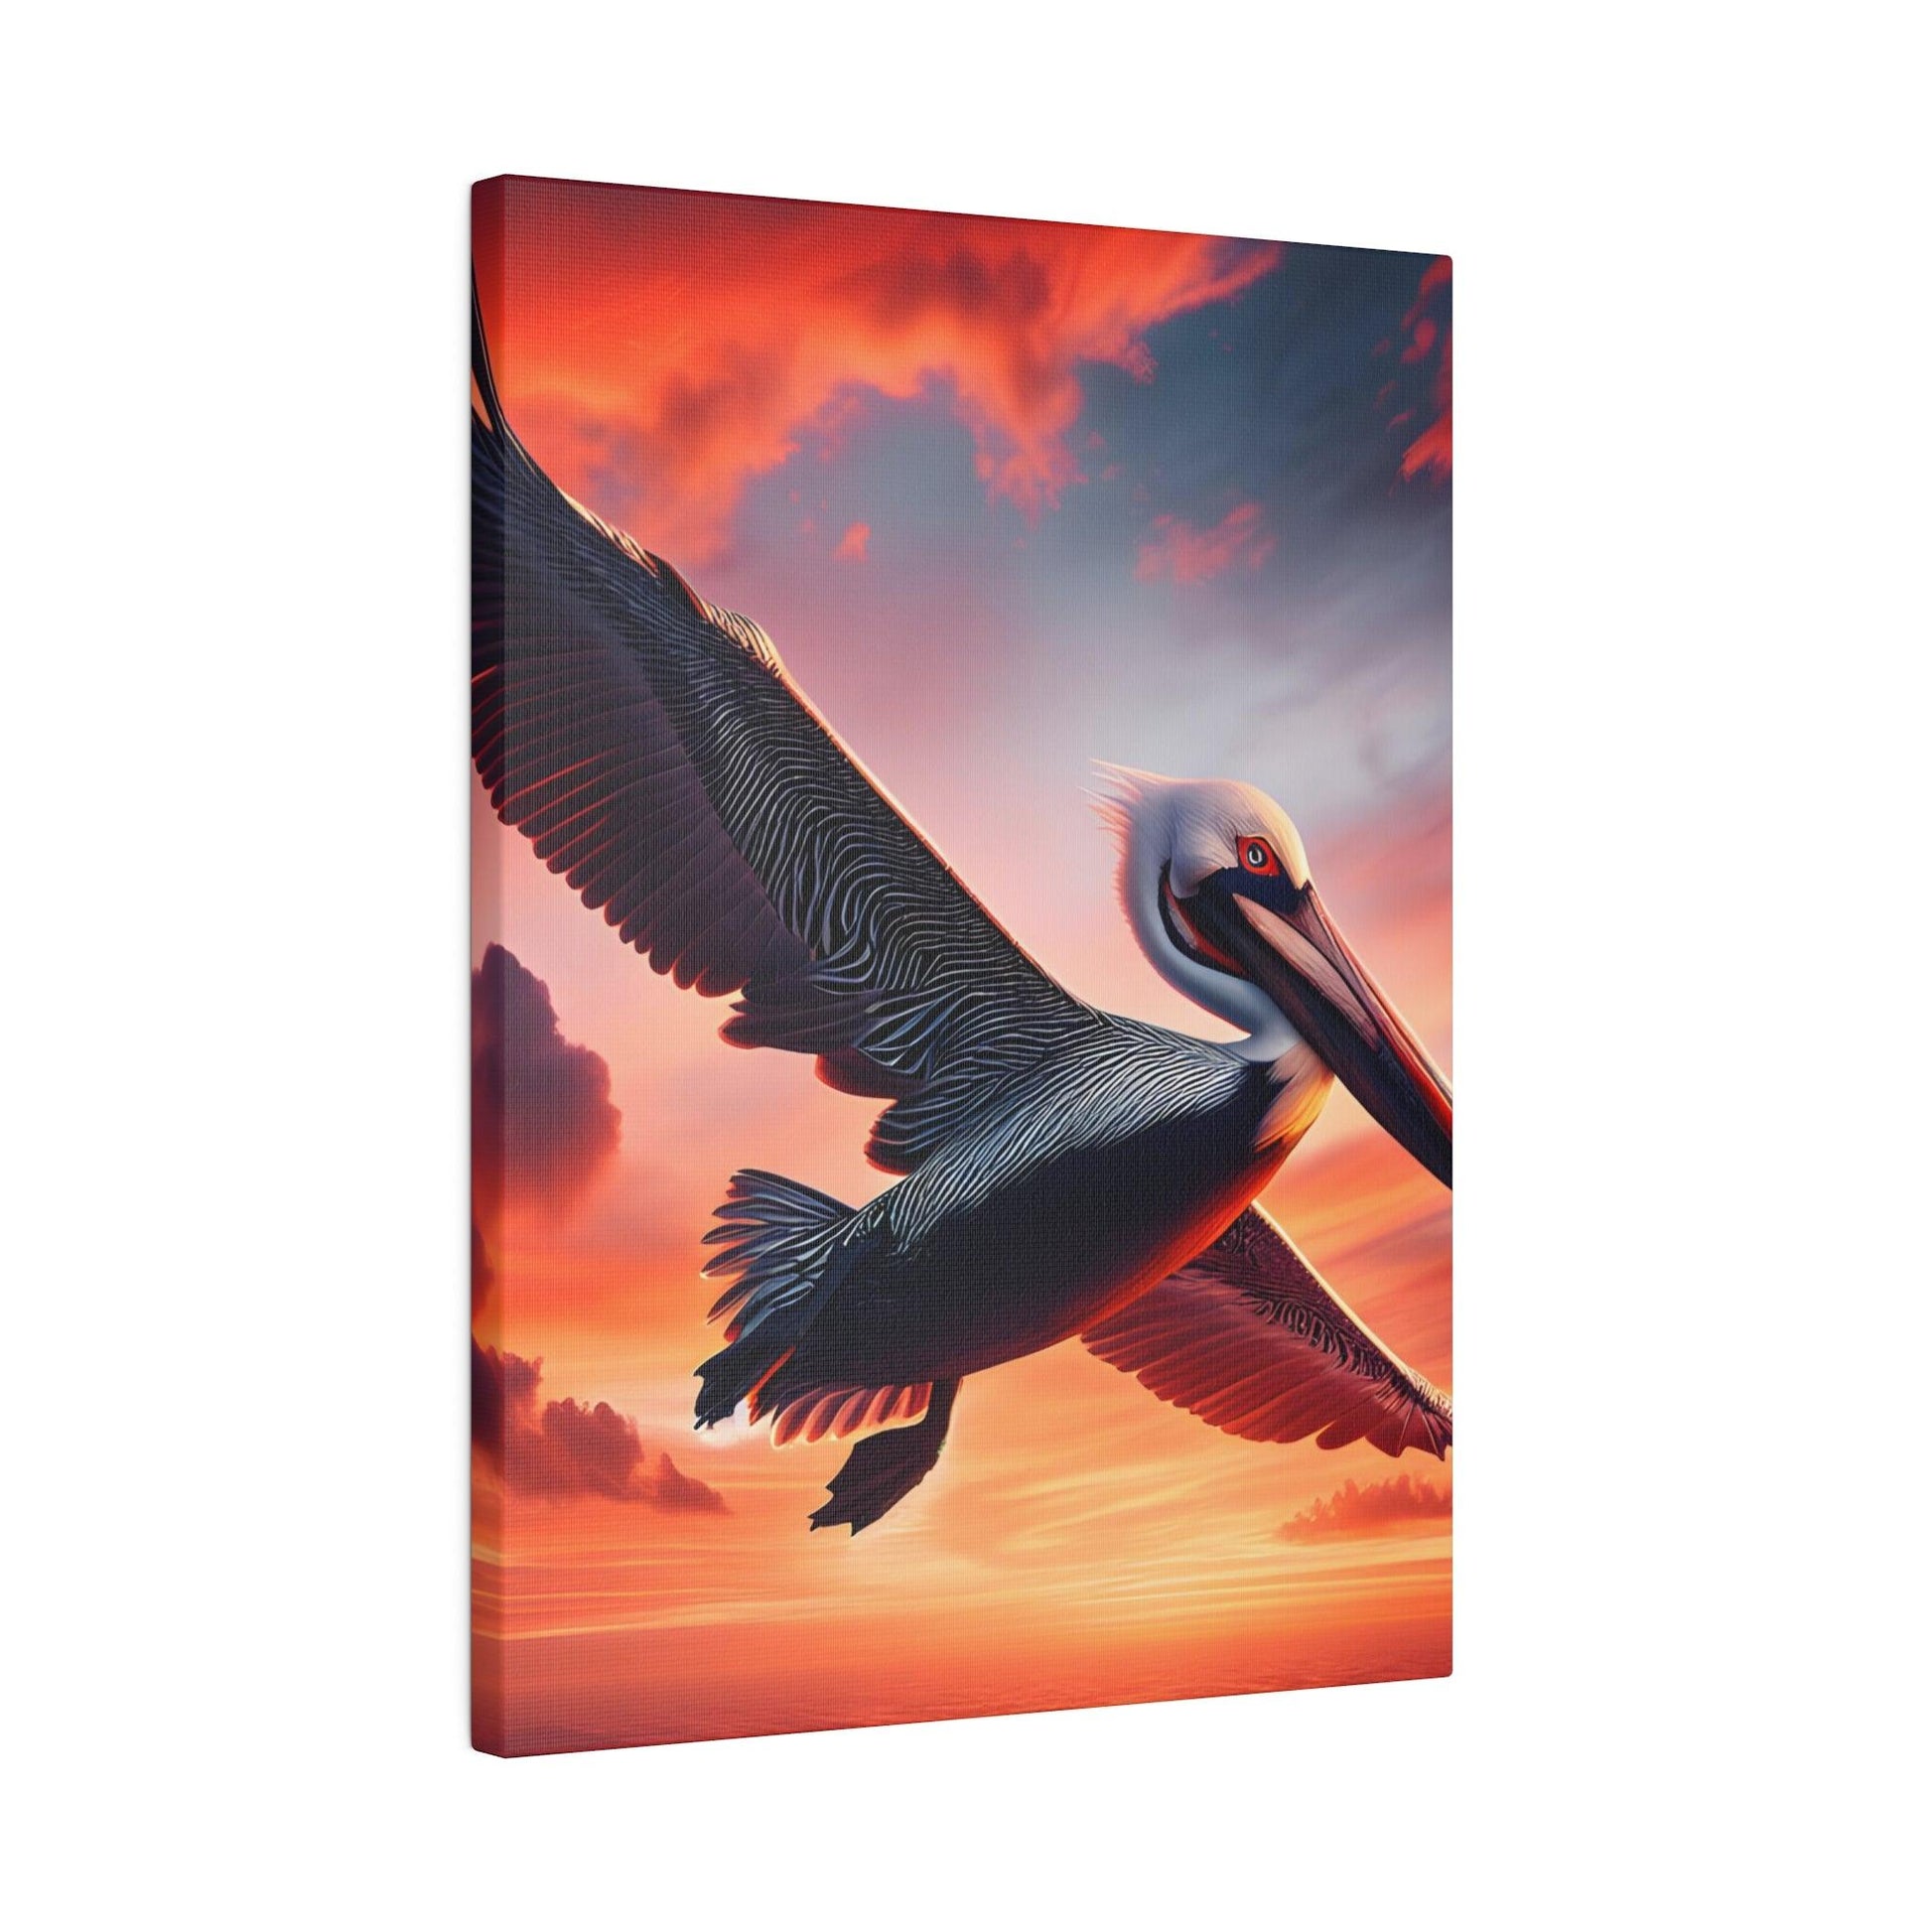 "Pelican Paradise: Expressive Canvas Wall Art" - The Alice Gallery